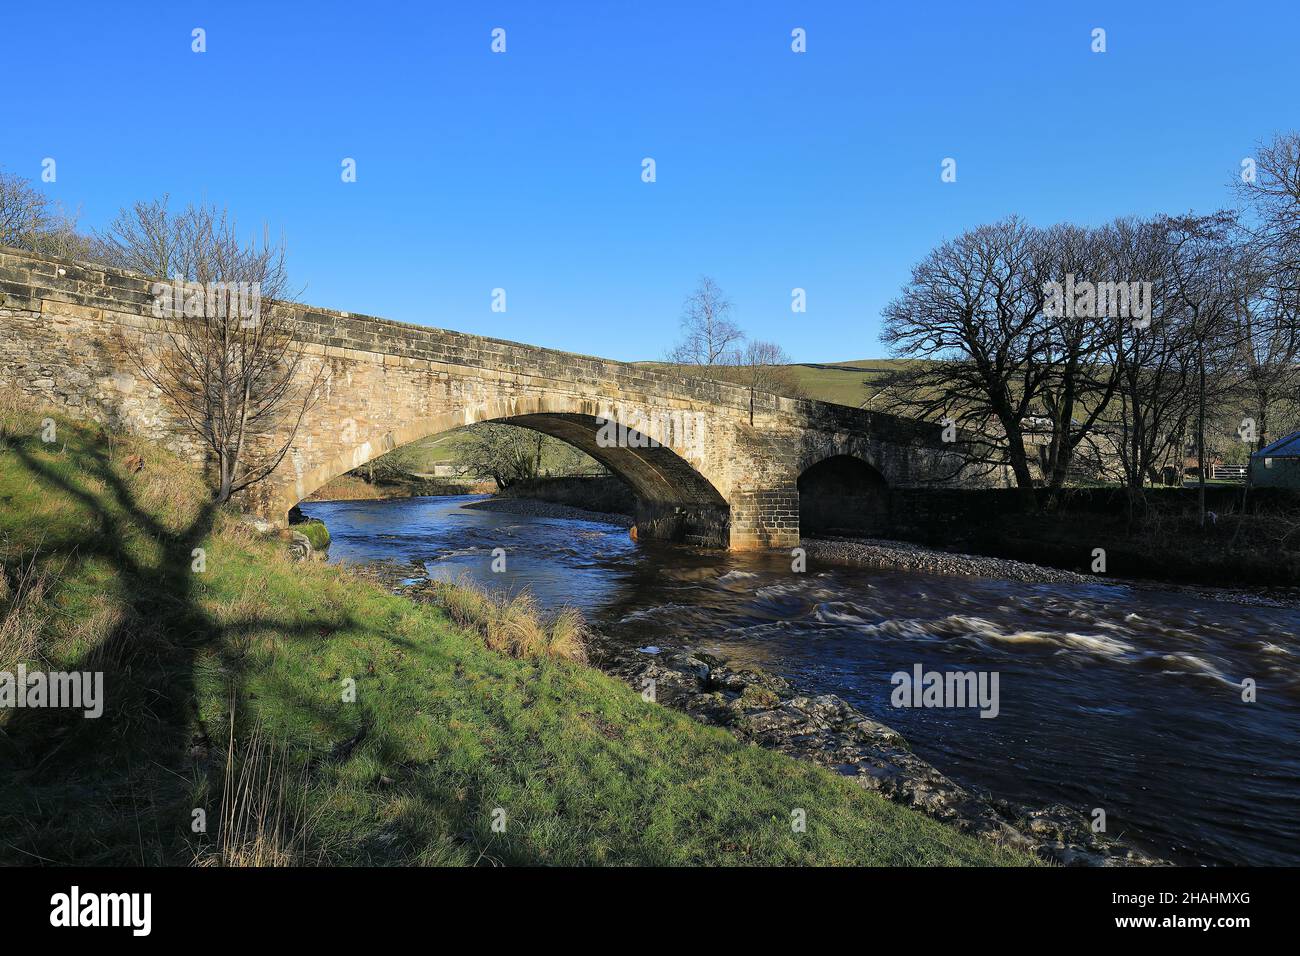 A stone bridge over the River Wharfe, at Kettlewell in Upper-Wharfedale, Yorkshire Dales National Park. Stock Photo